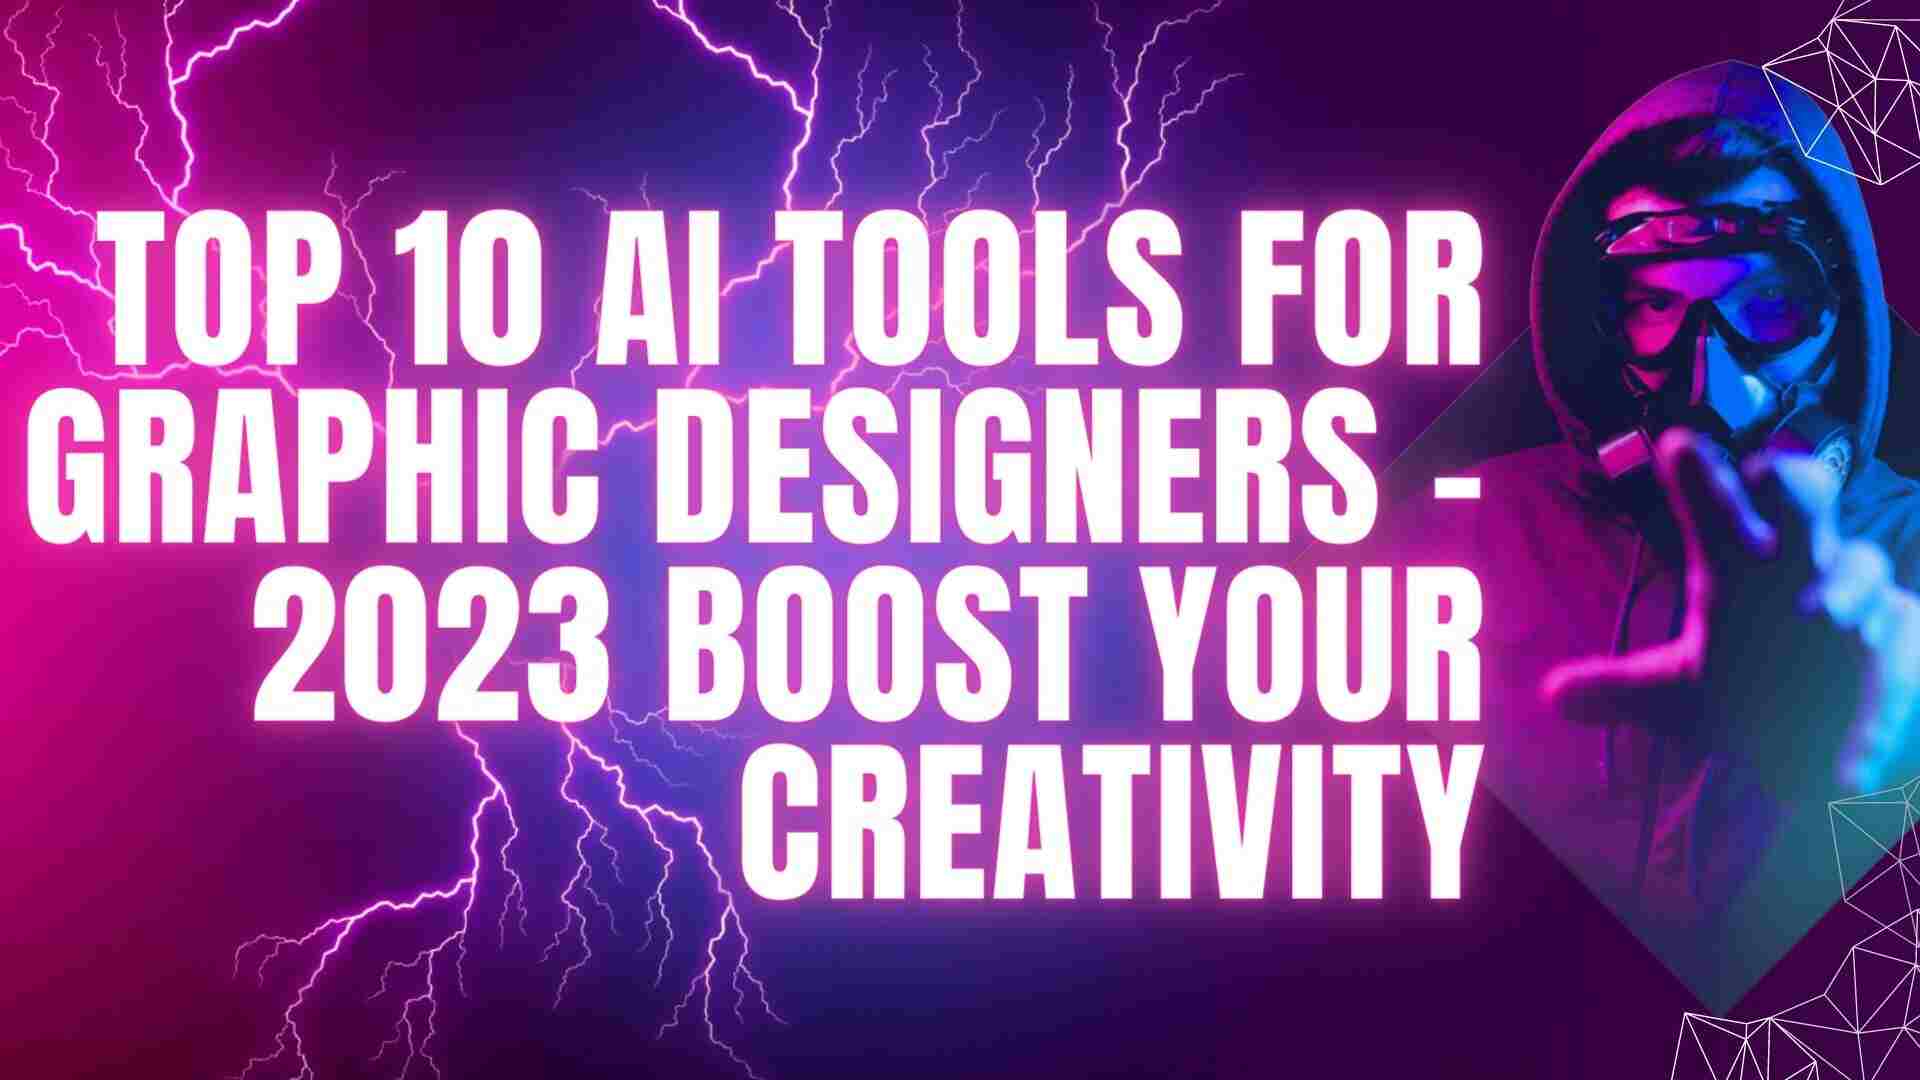 Top 10 AI Tools for Graphic Designers - 2023 Boost Your creativity